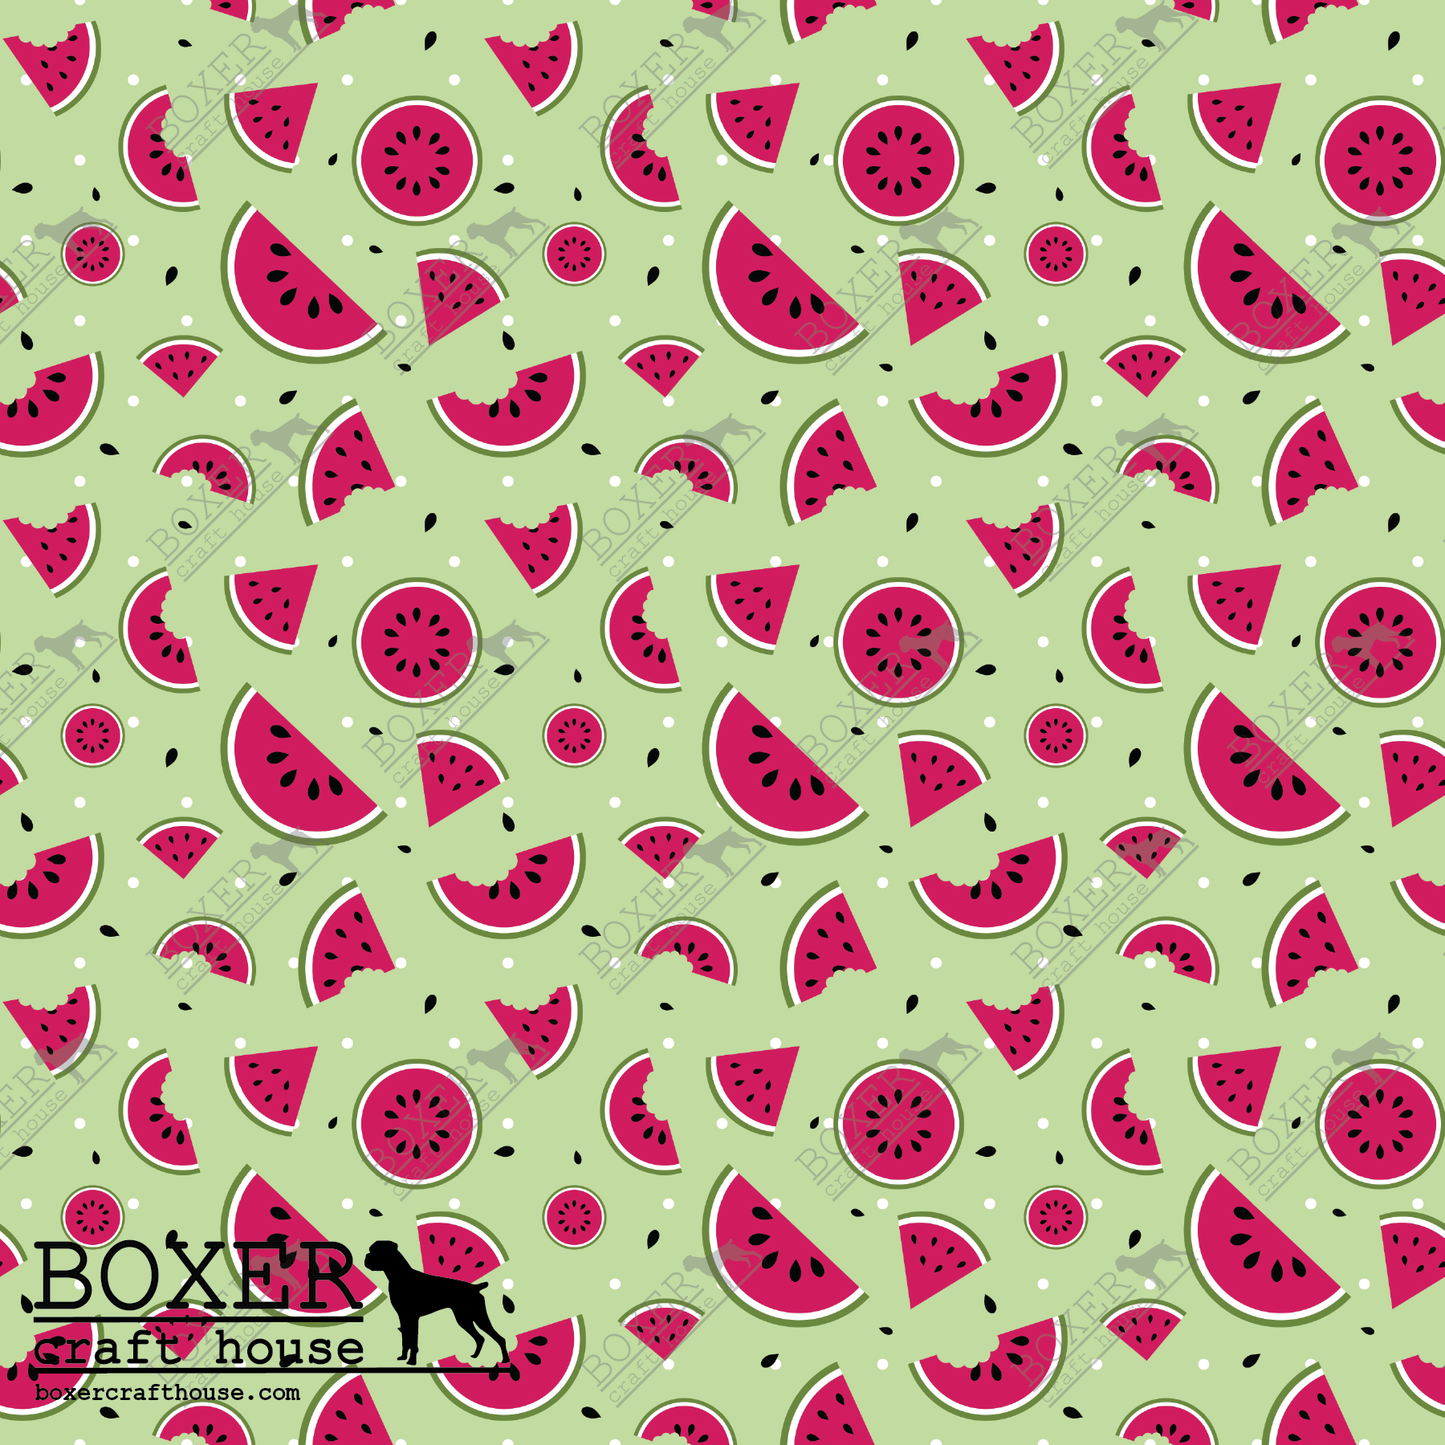 Watermelon Faux Leather, Embroidery Vinyl, Sewing Faux Leather, Bag Making Supplies, Faux Leather For Embroidery, Quality Faux Leather, Embroidery Supplies, Sewing Supplies, Woman Owned Business, Craft Supply Store, USA, In the Hoop Supplies, Sewing with vinyl,Specialty Vinyl, Printed in the USA Faux Leather,Watermelon Embroidery Vinyl, Watermelon Rind Vinyl, Watermelon Rind Faux Leather, Summer Themed Faux Leather, Watermelon Seeds Faux Leather,